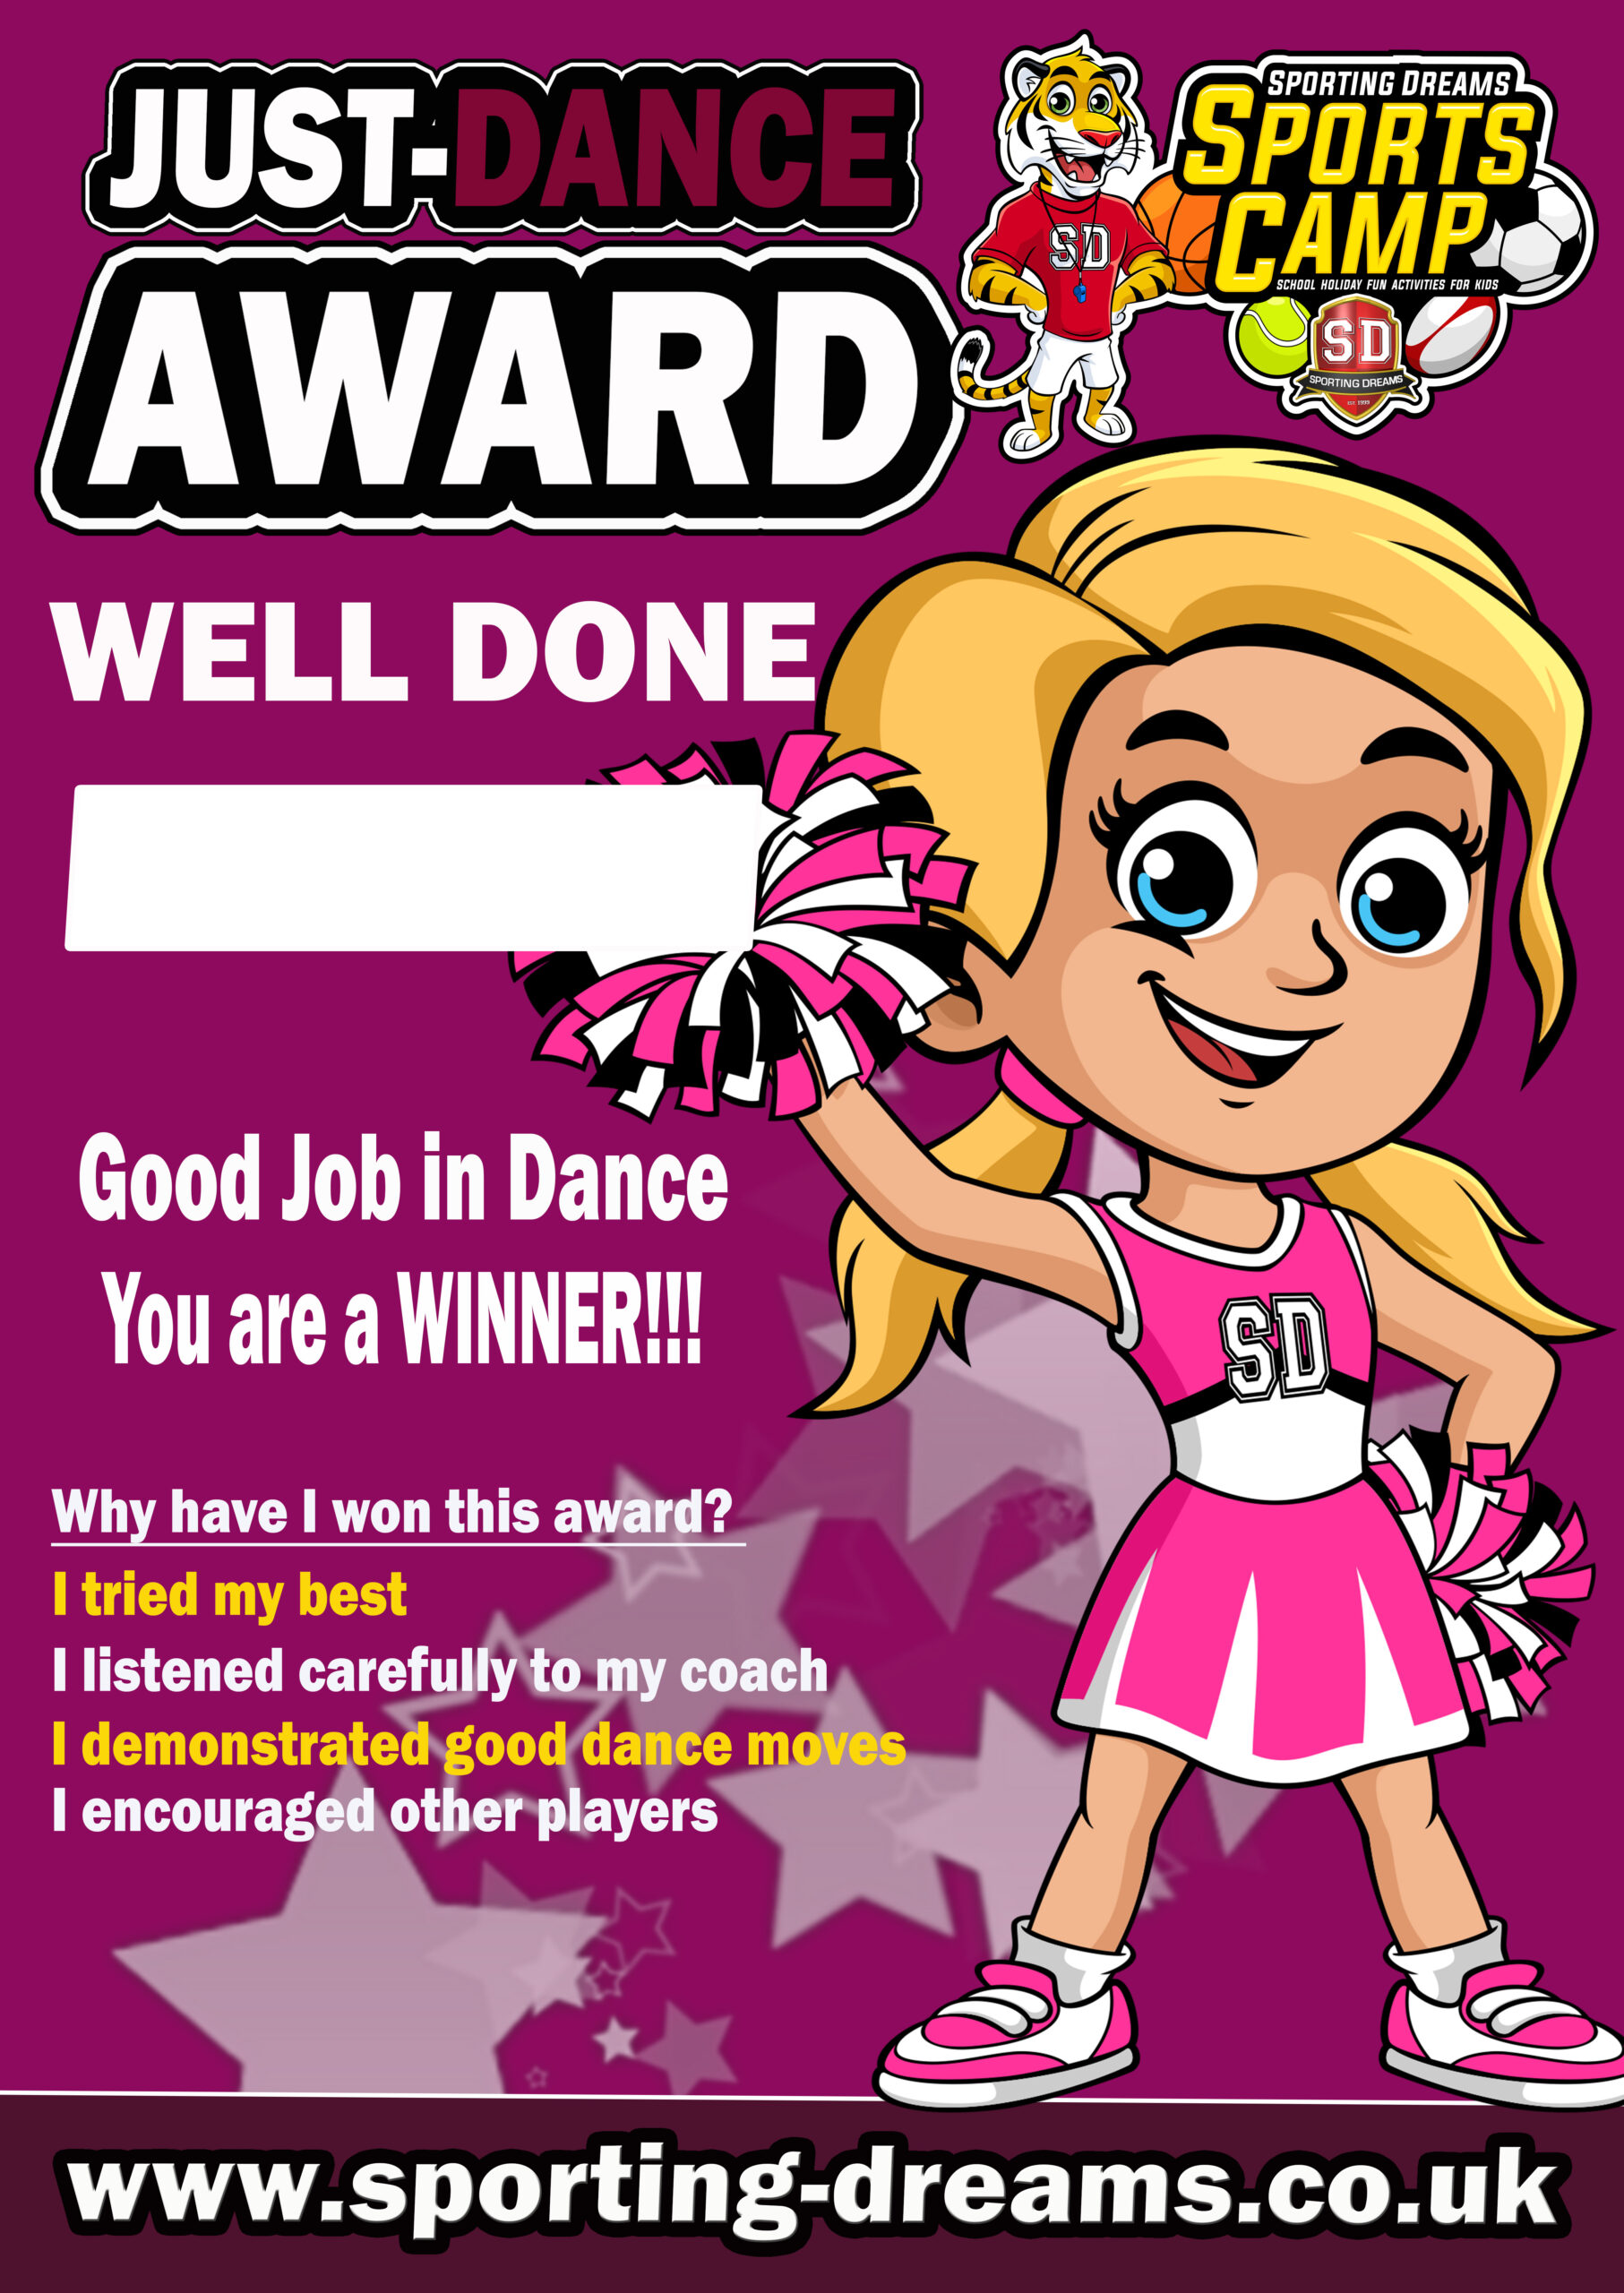 Sporting Dreams School Holiday Sports Camps. Dance Award